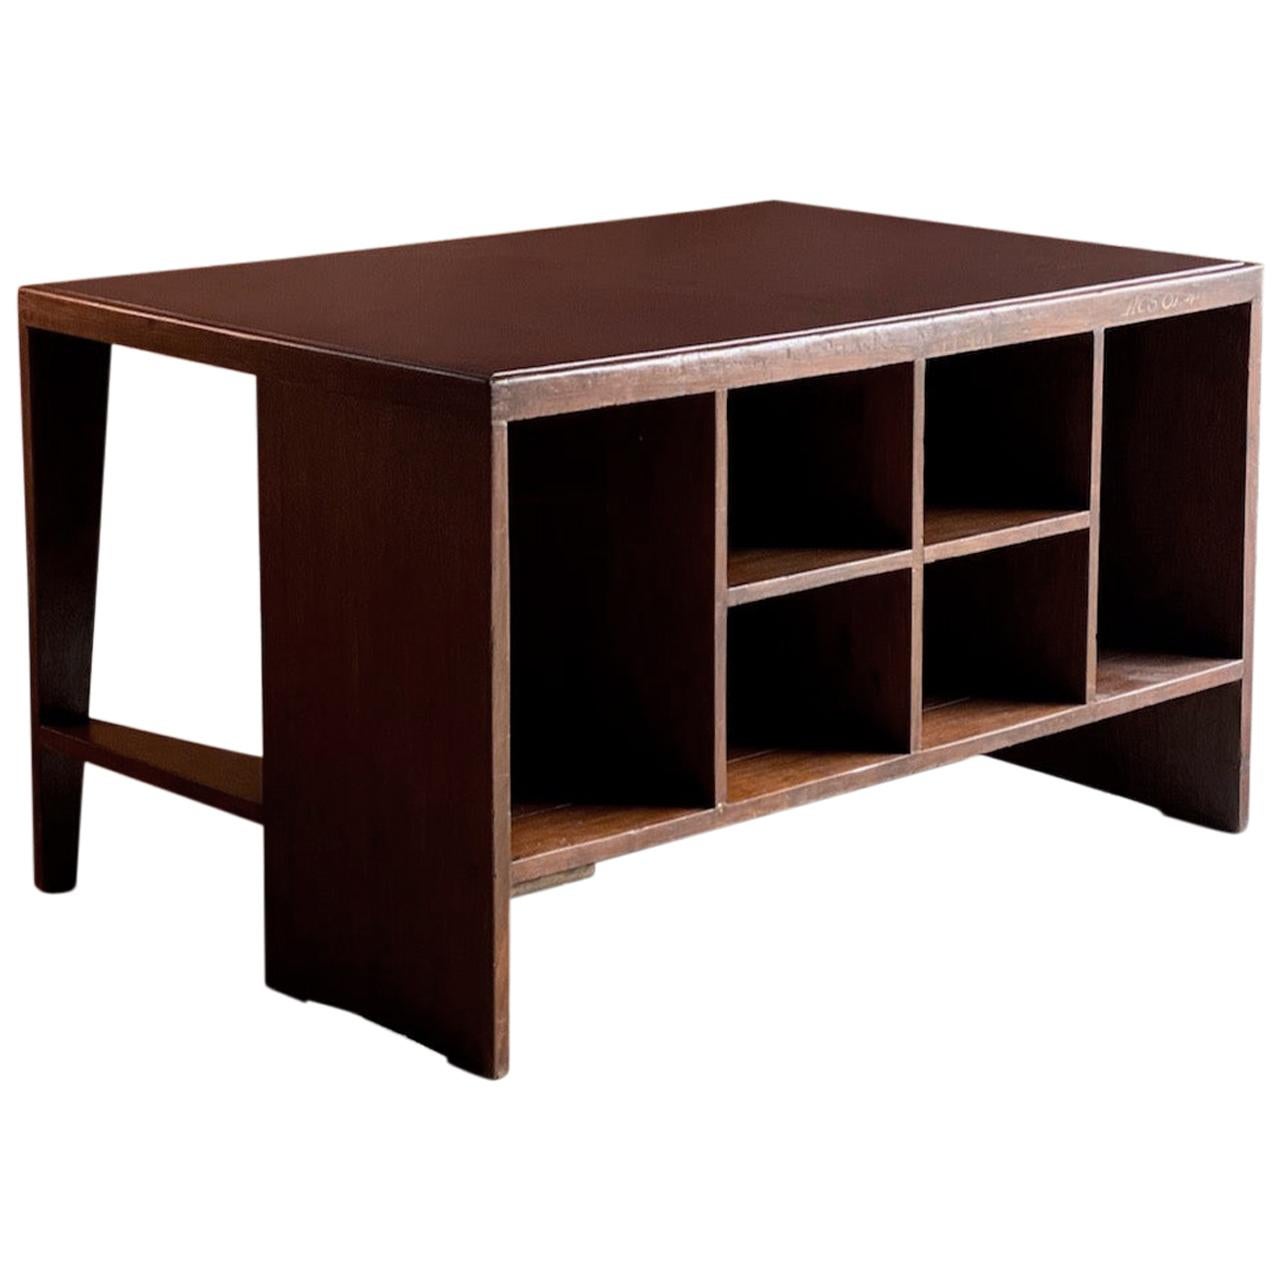 Pierre Jeanneret rosewood pigeonhole desk model PJ-BU-02-A, circa 1955

Pierre Jeanneret Sissoo rosewood pigeon hole desk with integrated bookcase, model PJ-BU-02-A circa 1955, Indian Sissoo rosewood desk with rectangular leather inset top over